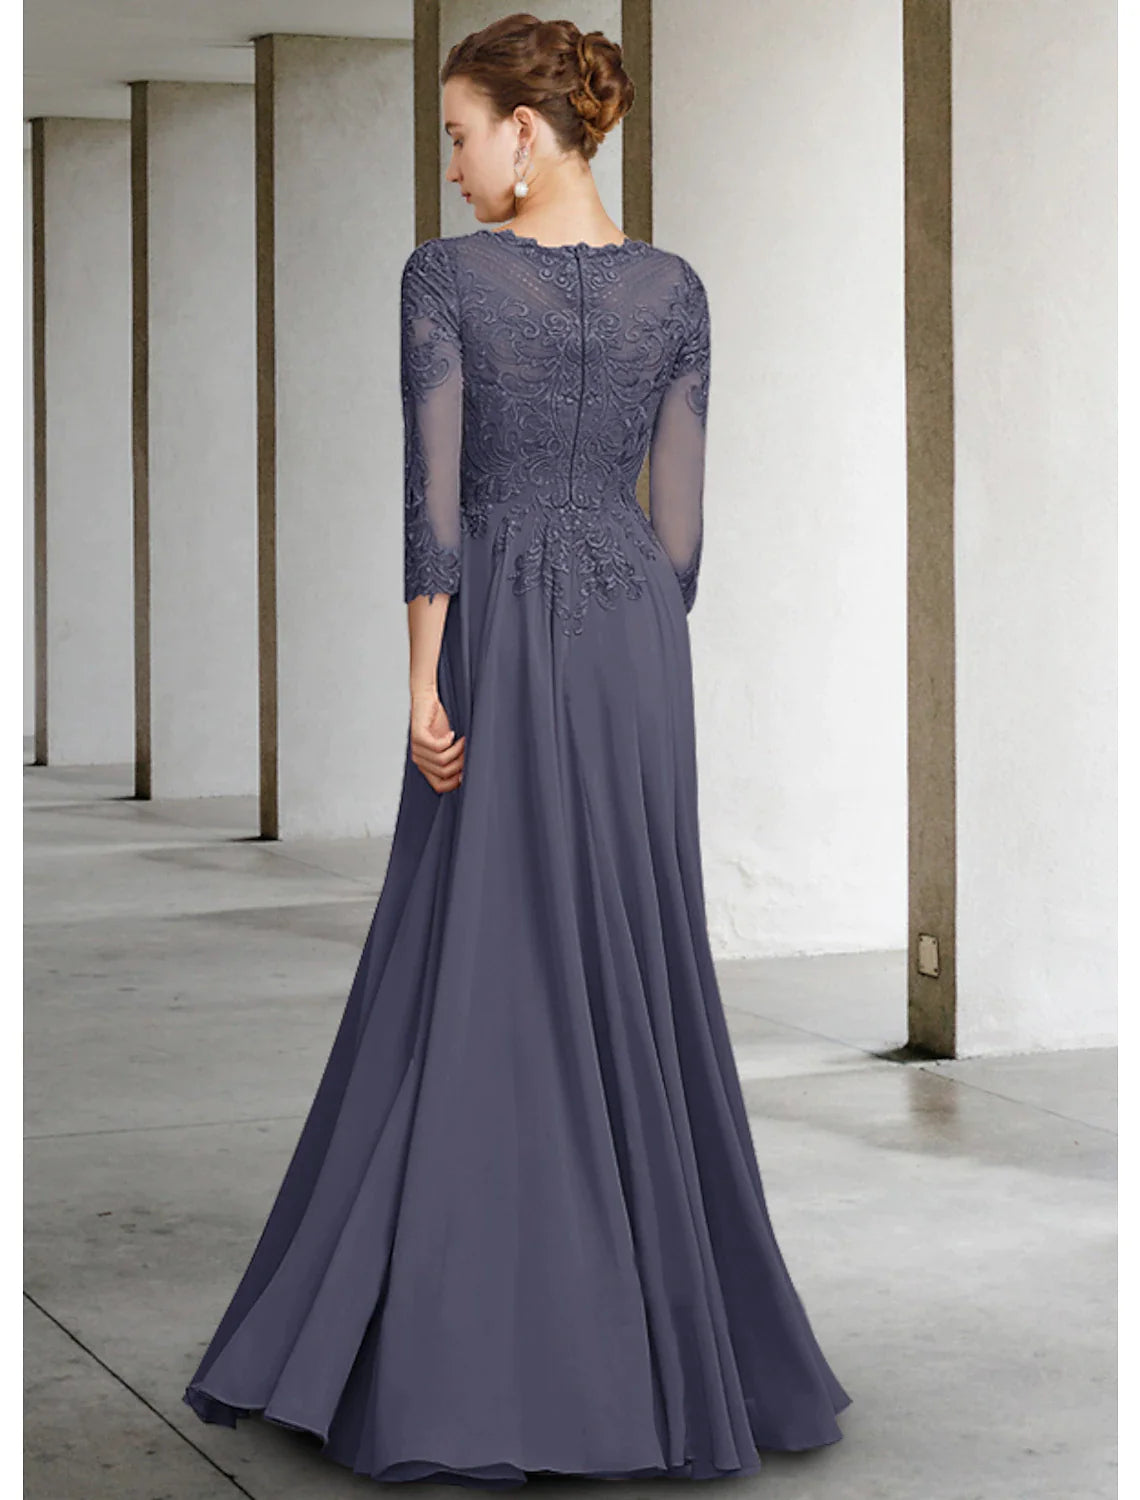 A-Line Mother of the Bride Dress Elegant Jewel Neck Floor Length Chiffon Lace 3/4 Length Sleeve with Pleats Appliques